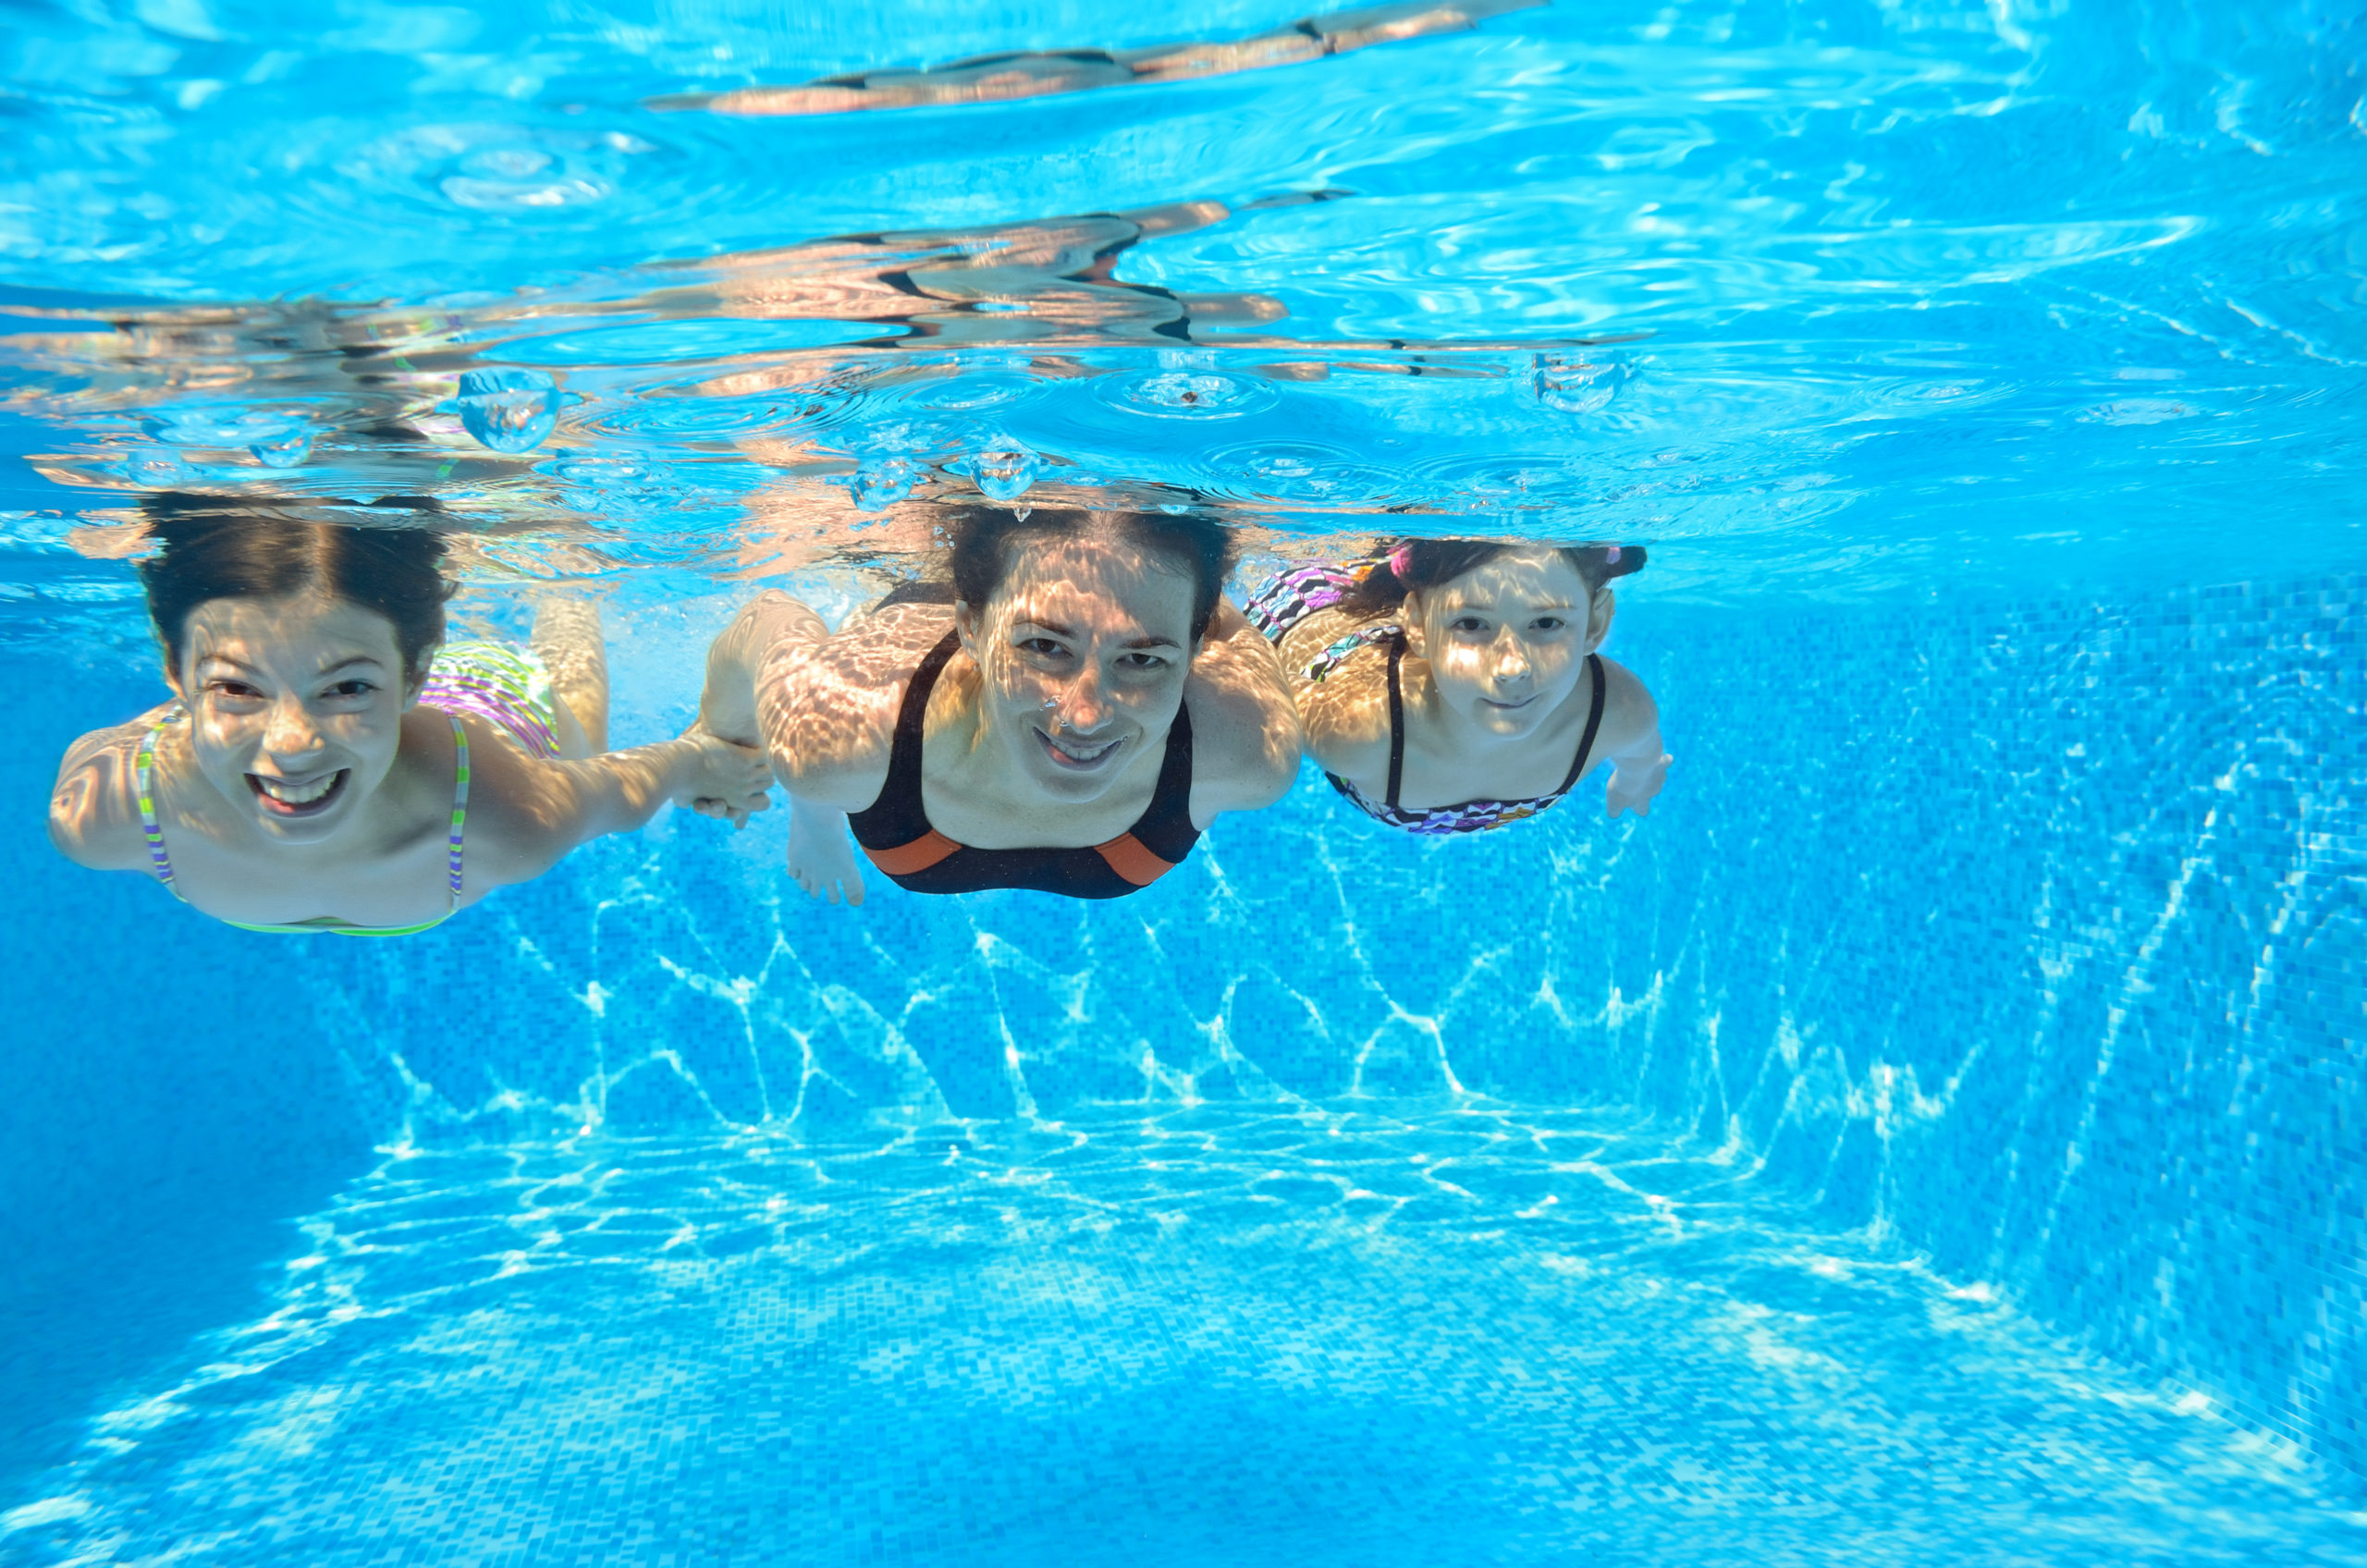 Three women having a great time swimming